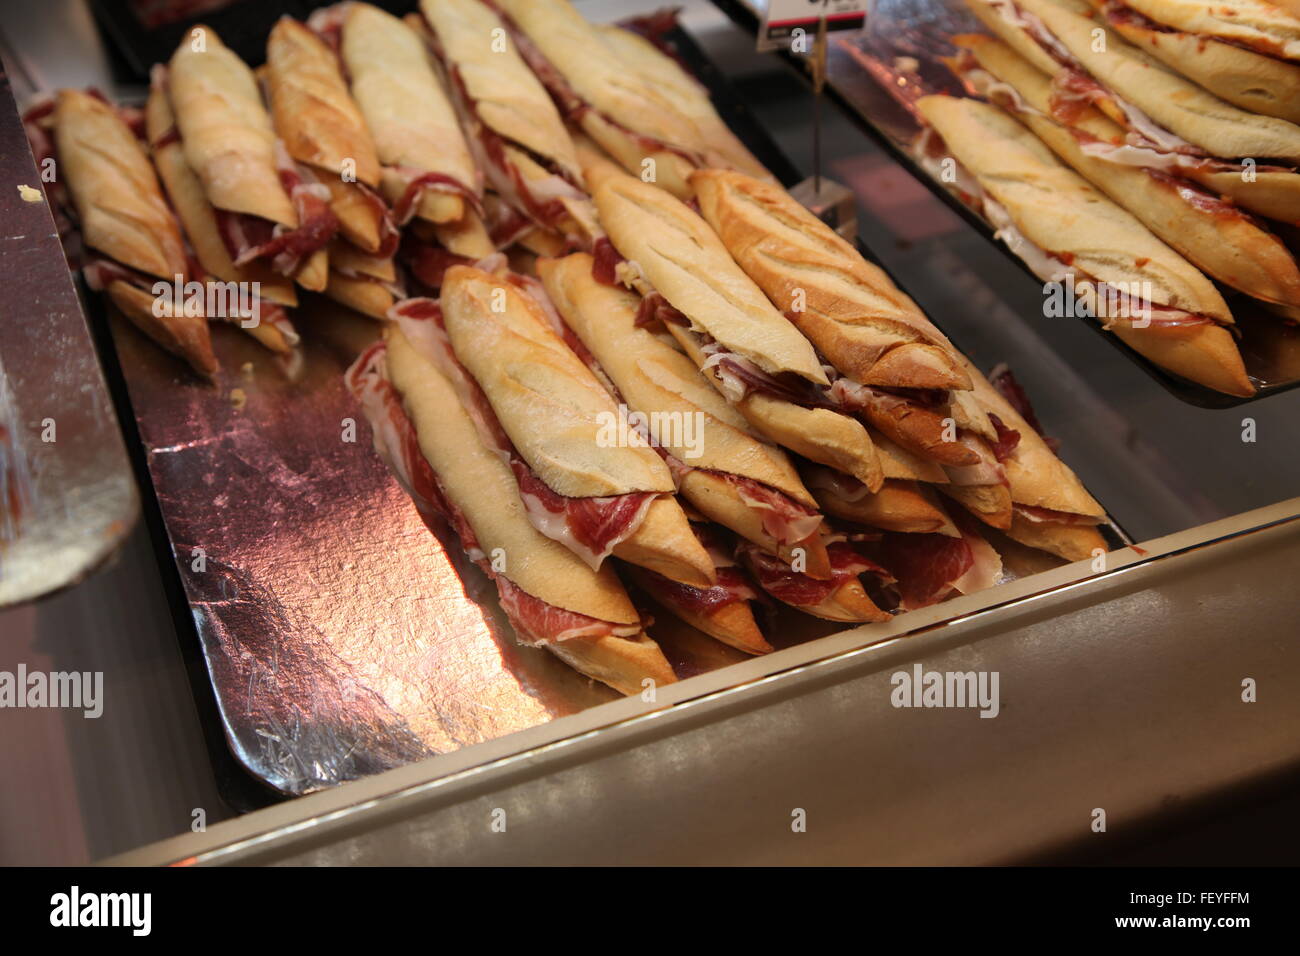 Sandwiches With Ham In Cabinet Display Stock Photo